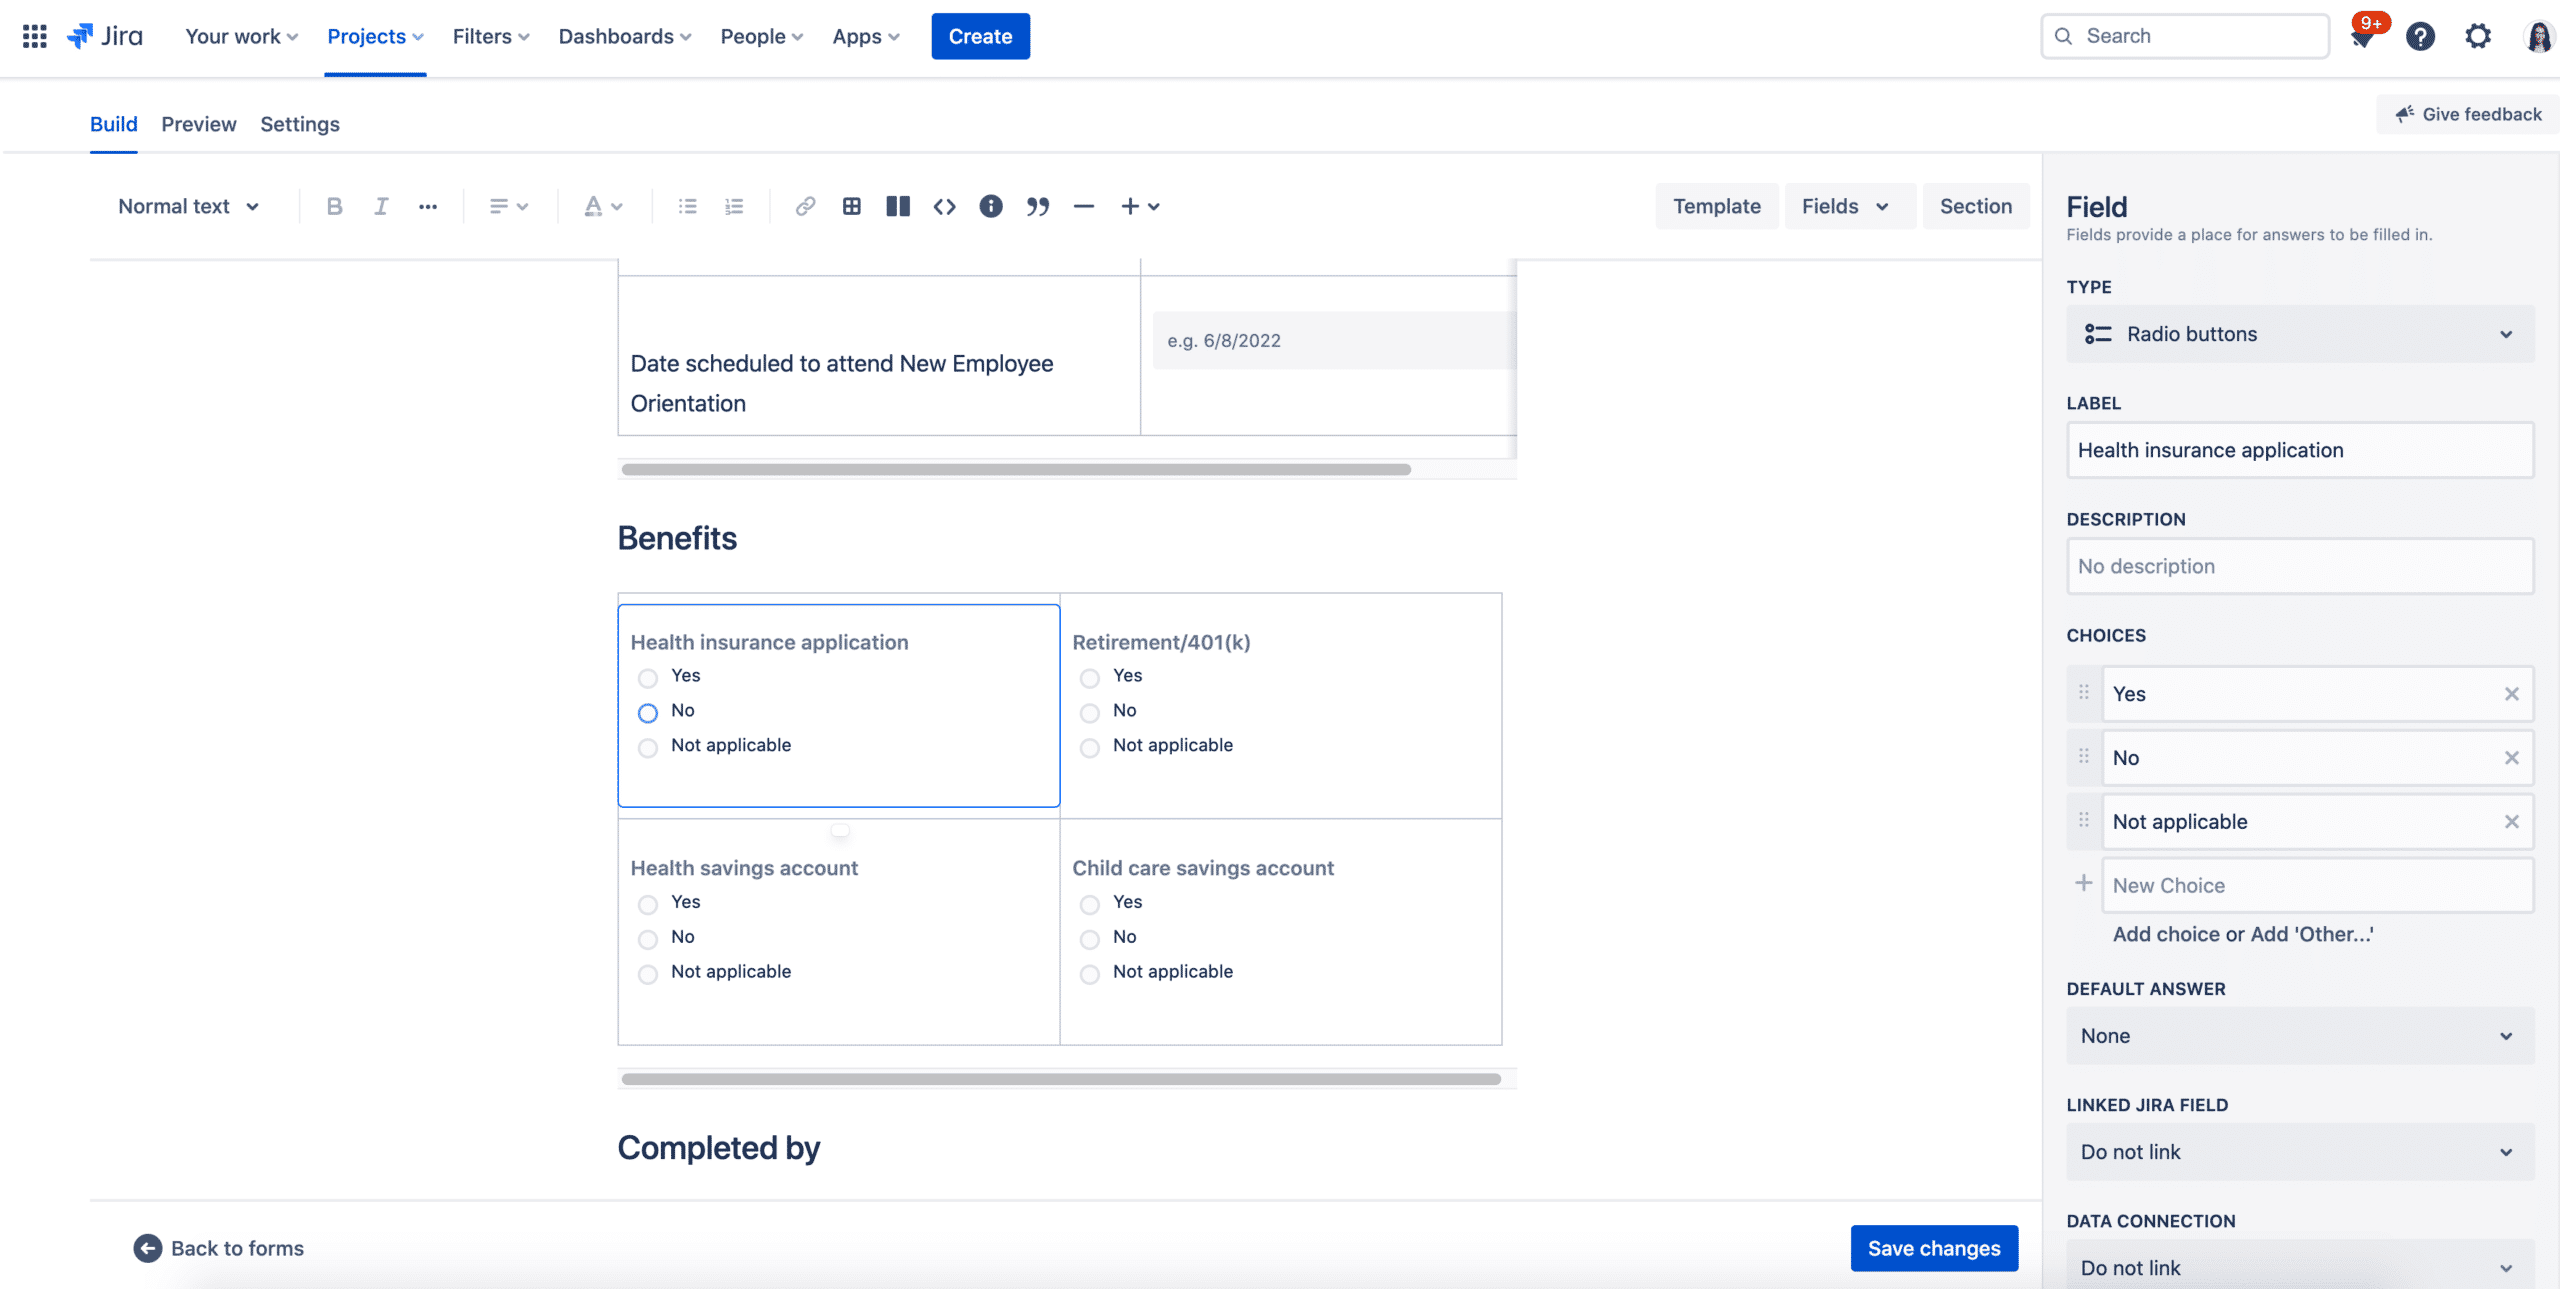 proforma forms for jira